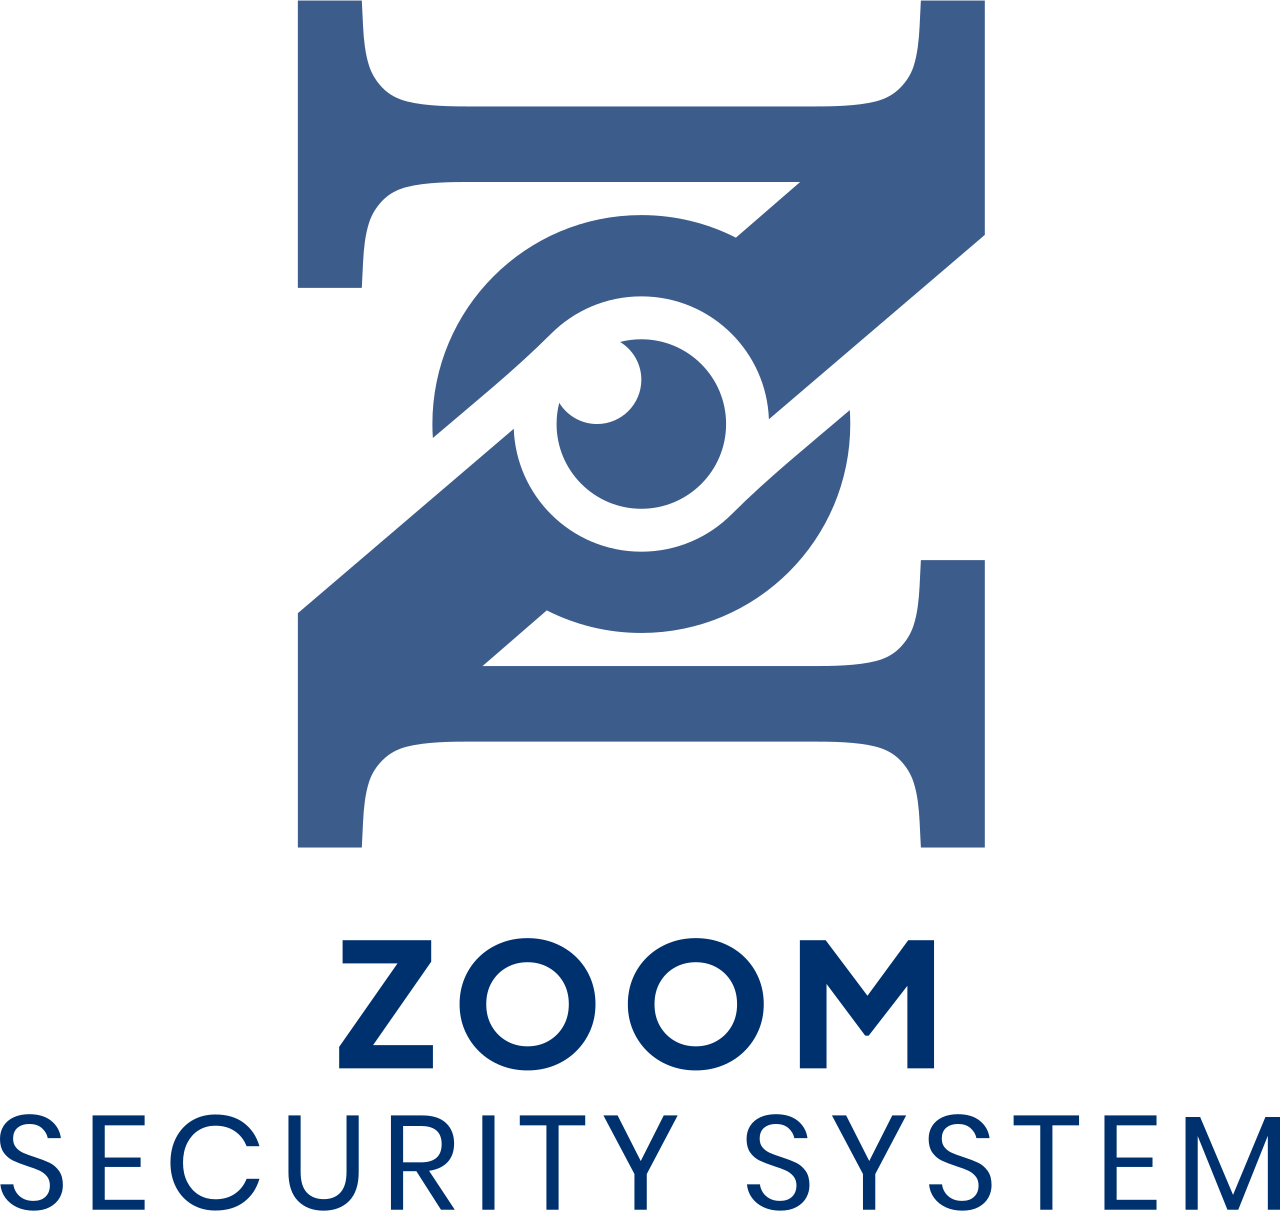 ZOOM's web page